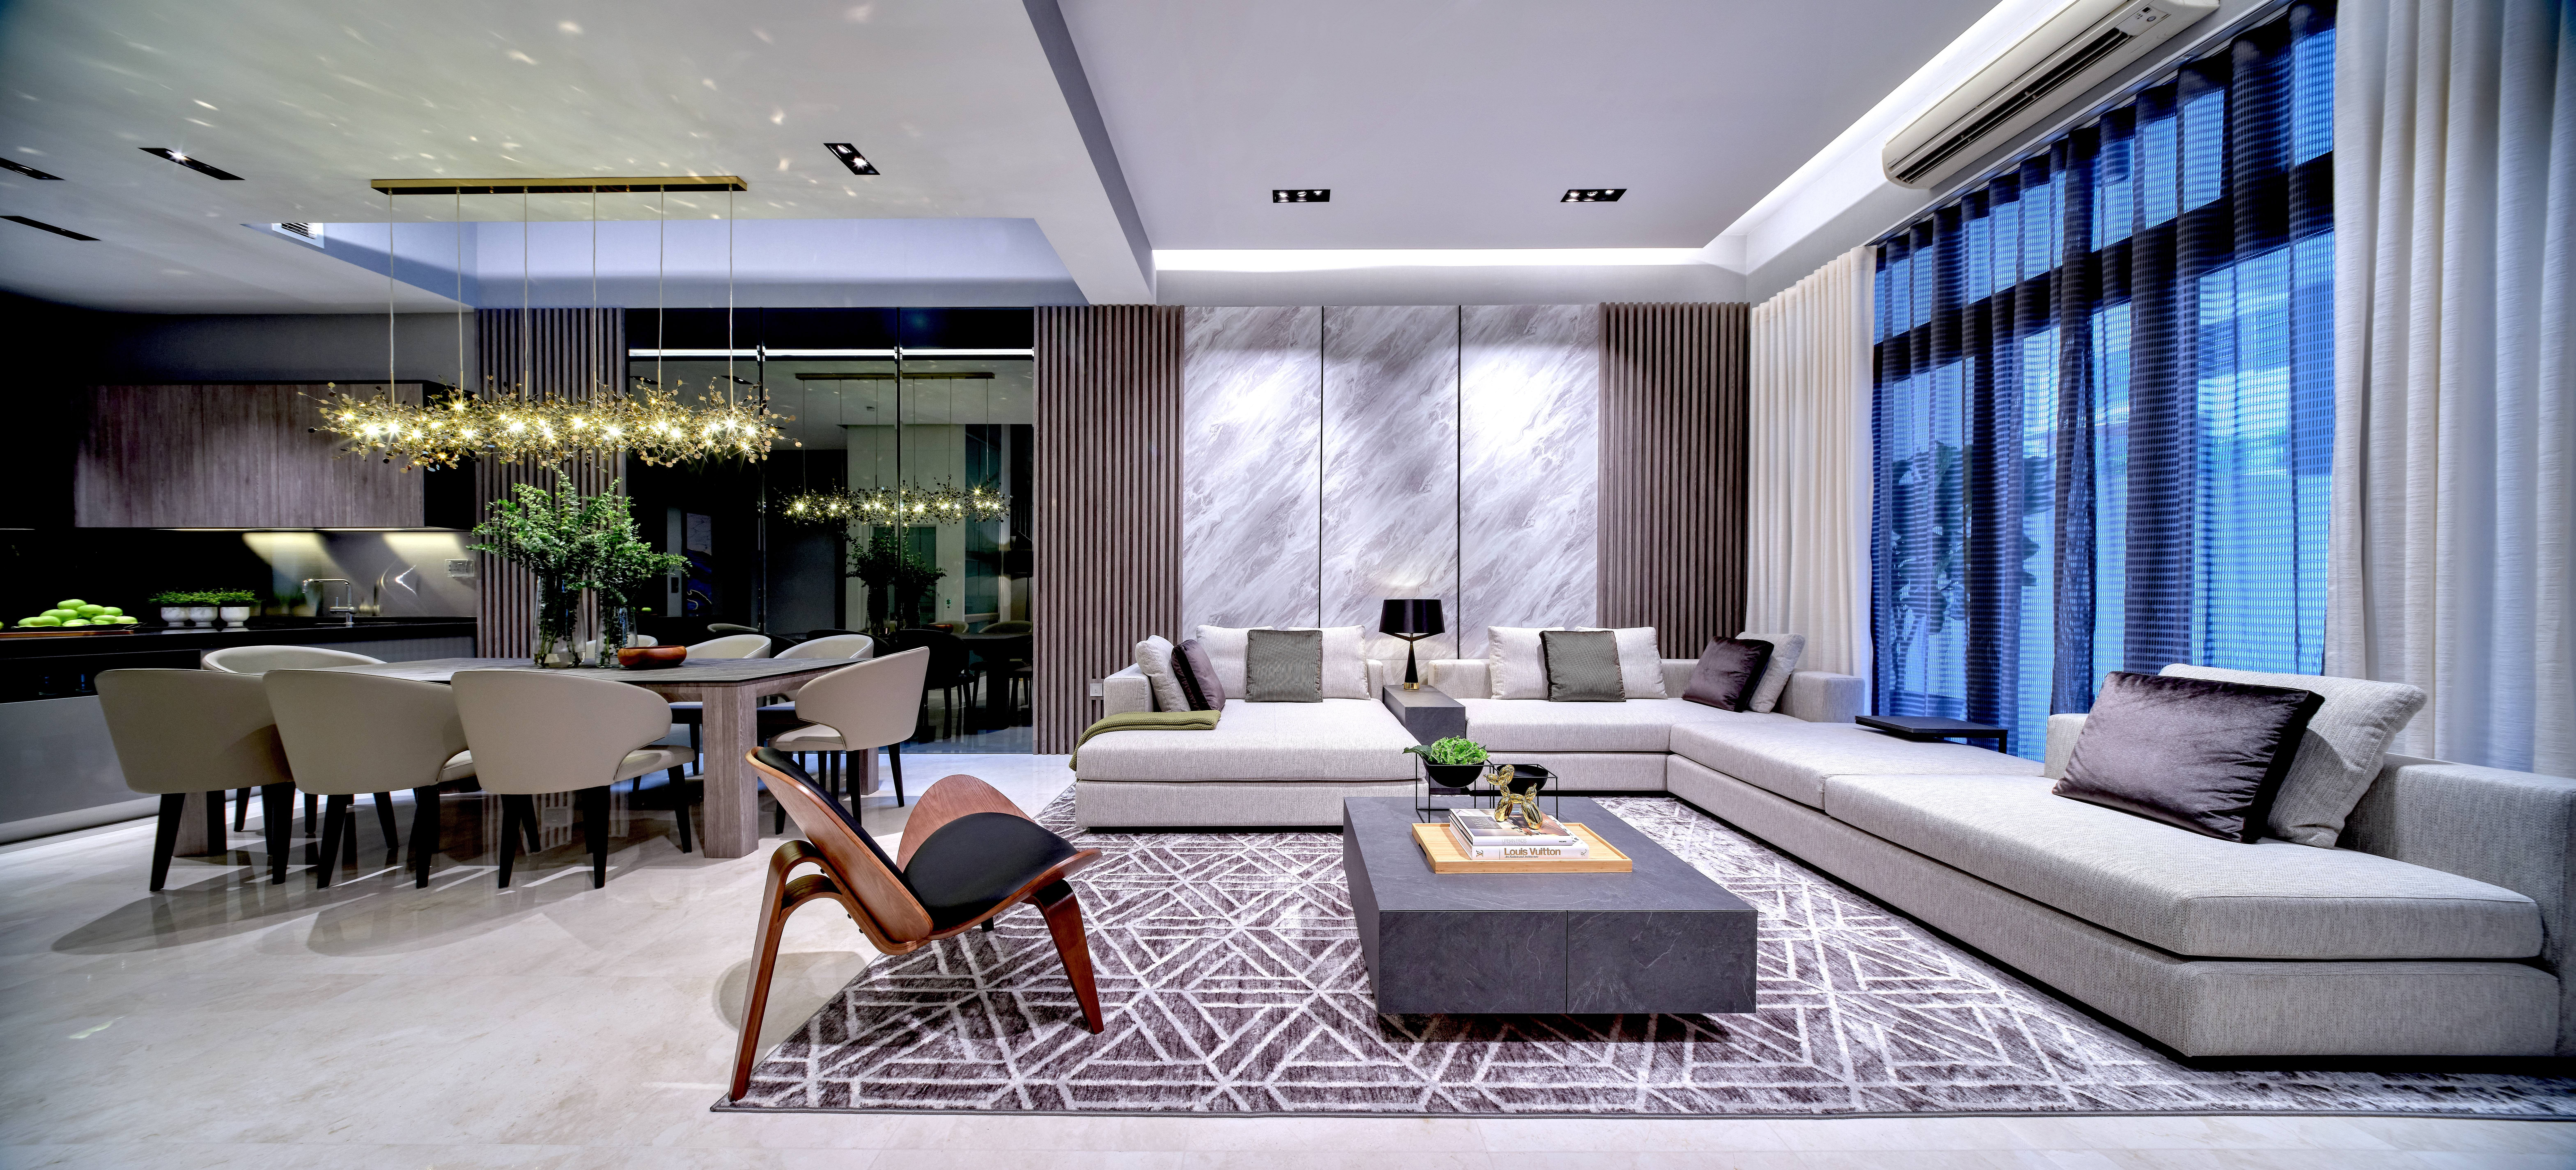 House Tour: Hotel luxe and bespoke furnishings in this Luxus Hill Drive